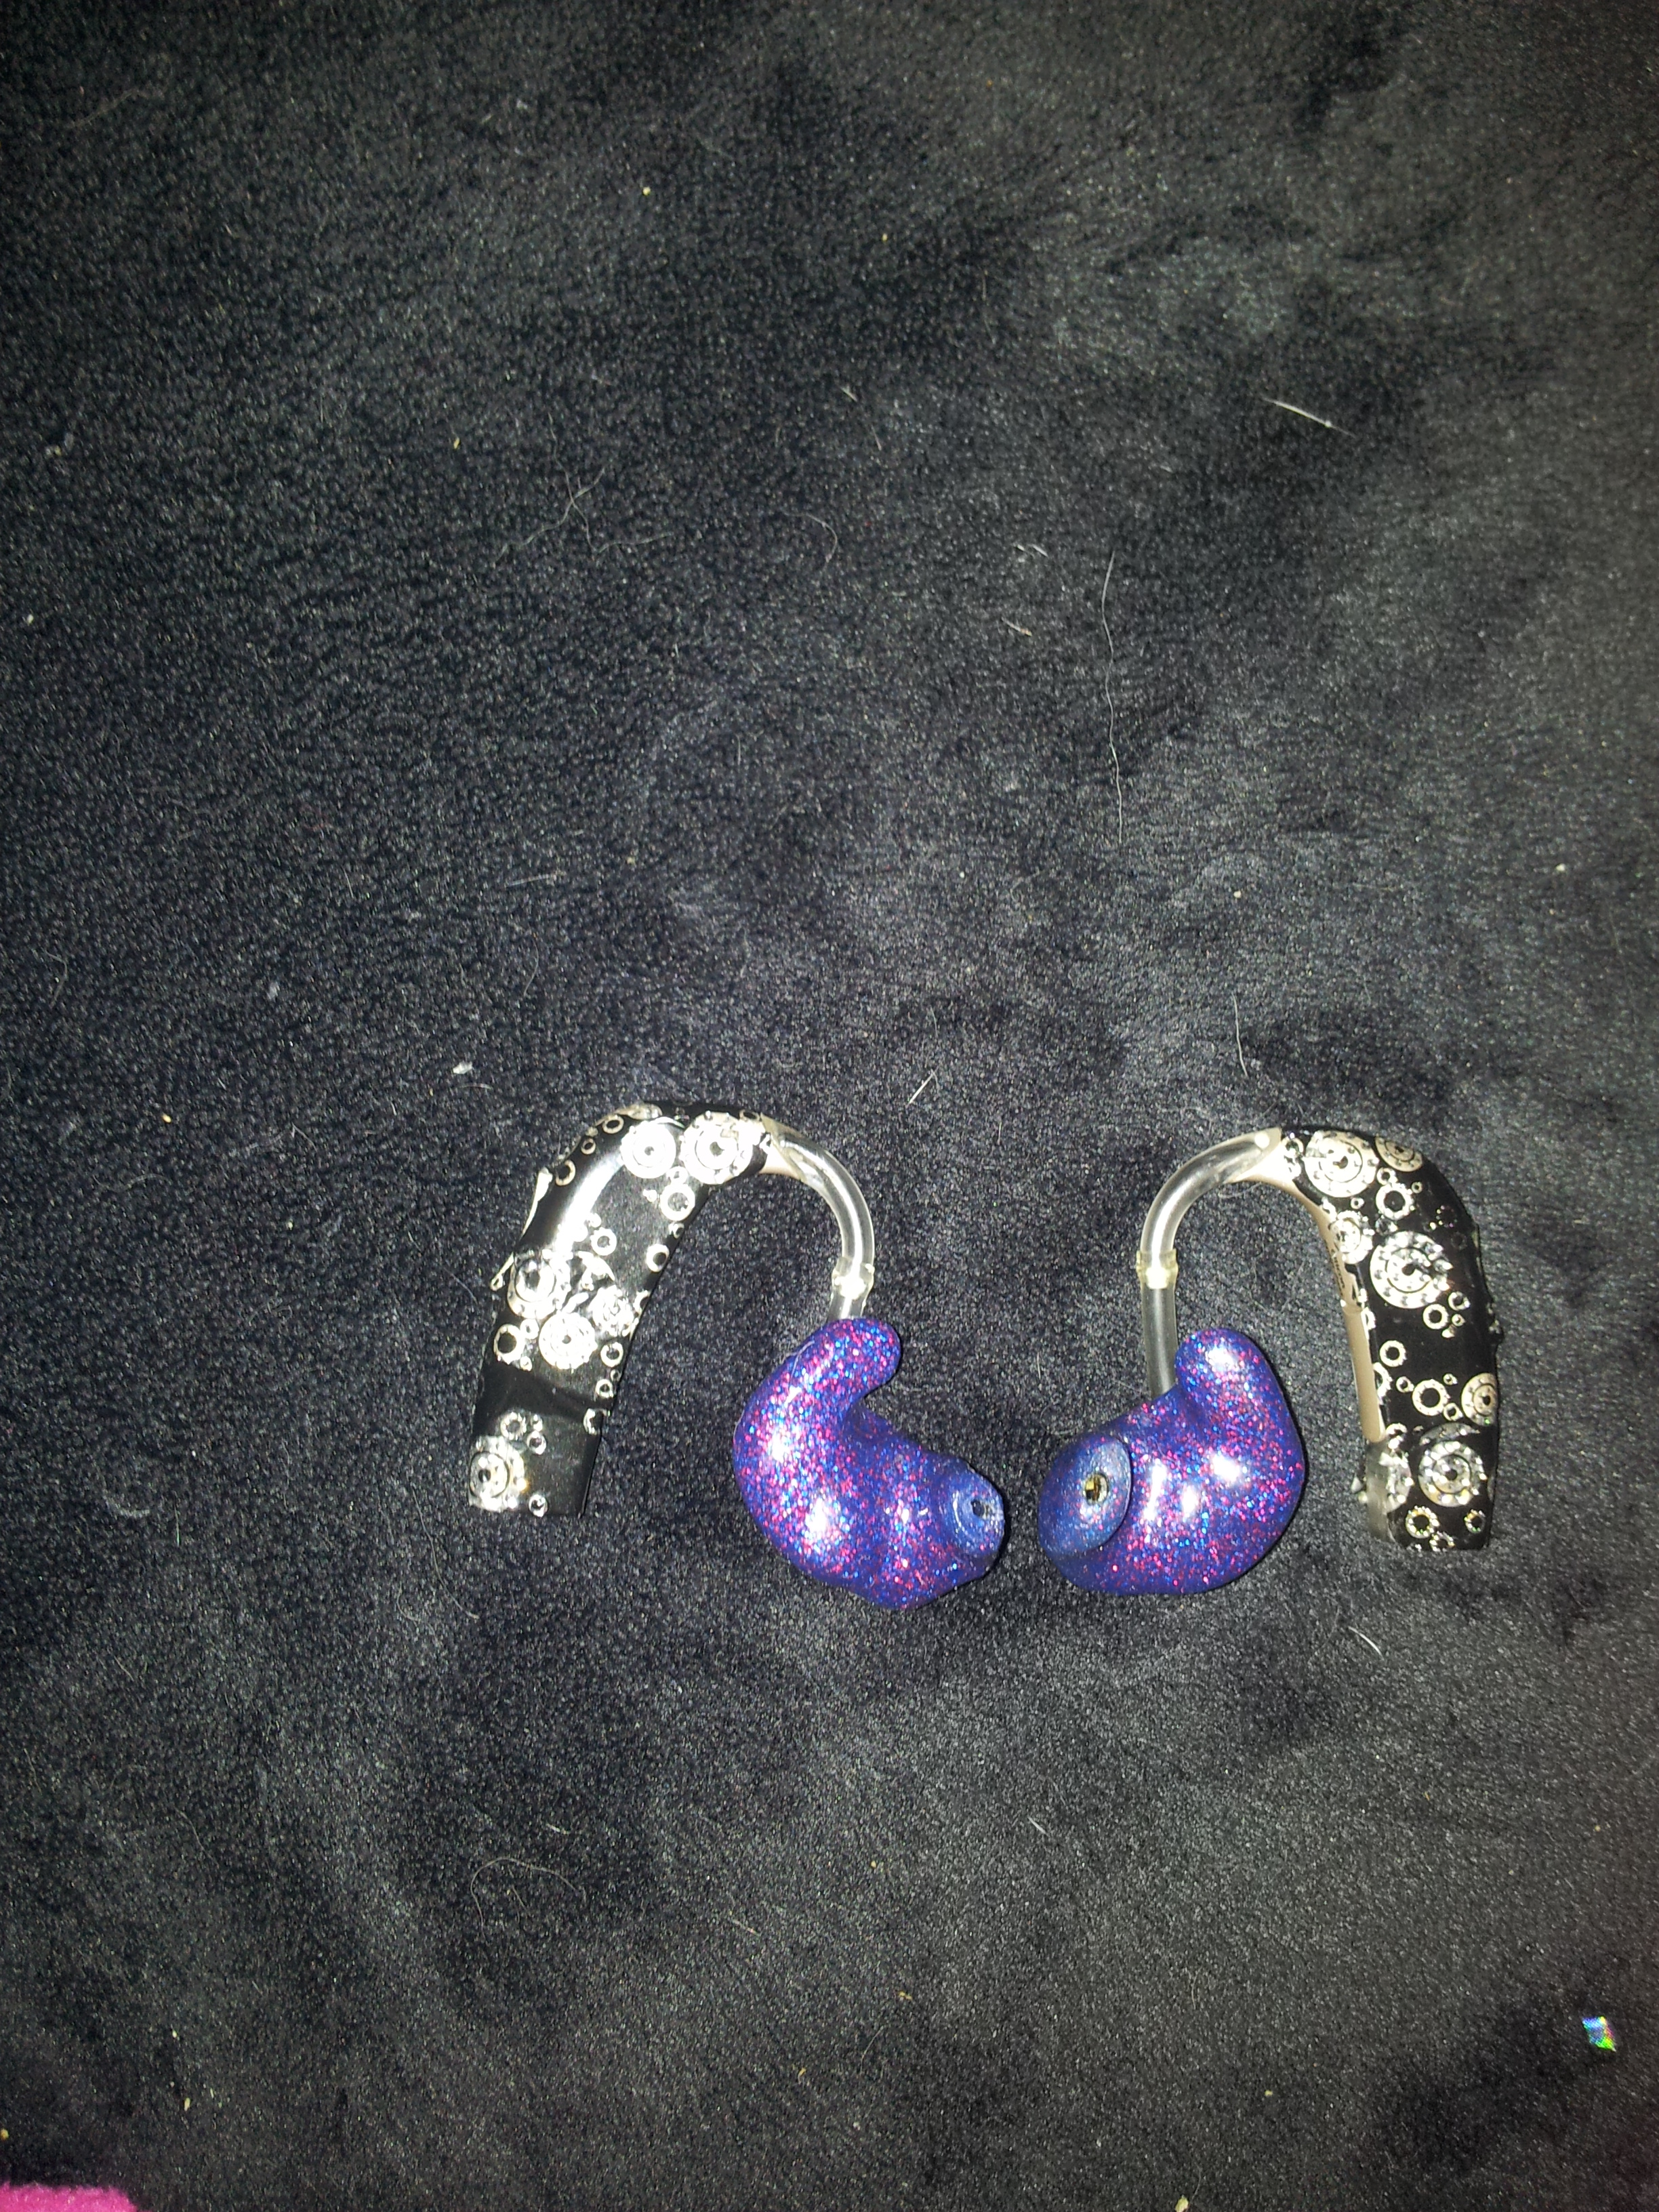 Stevie from the UK really blinged up her hearing aids for the holidays.